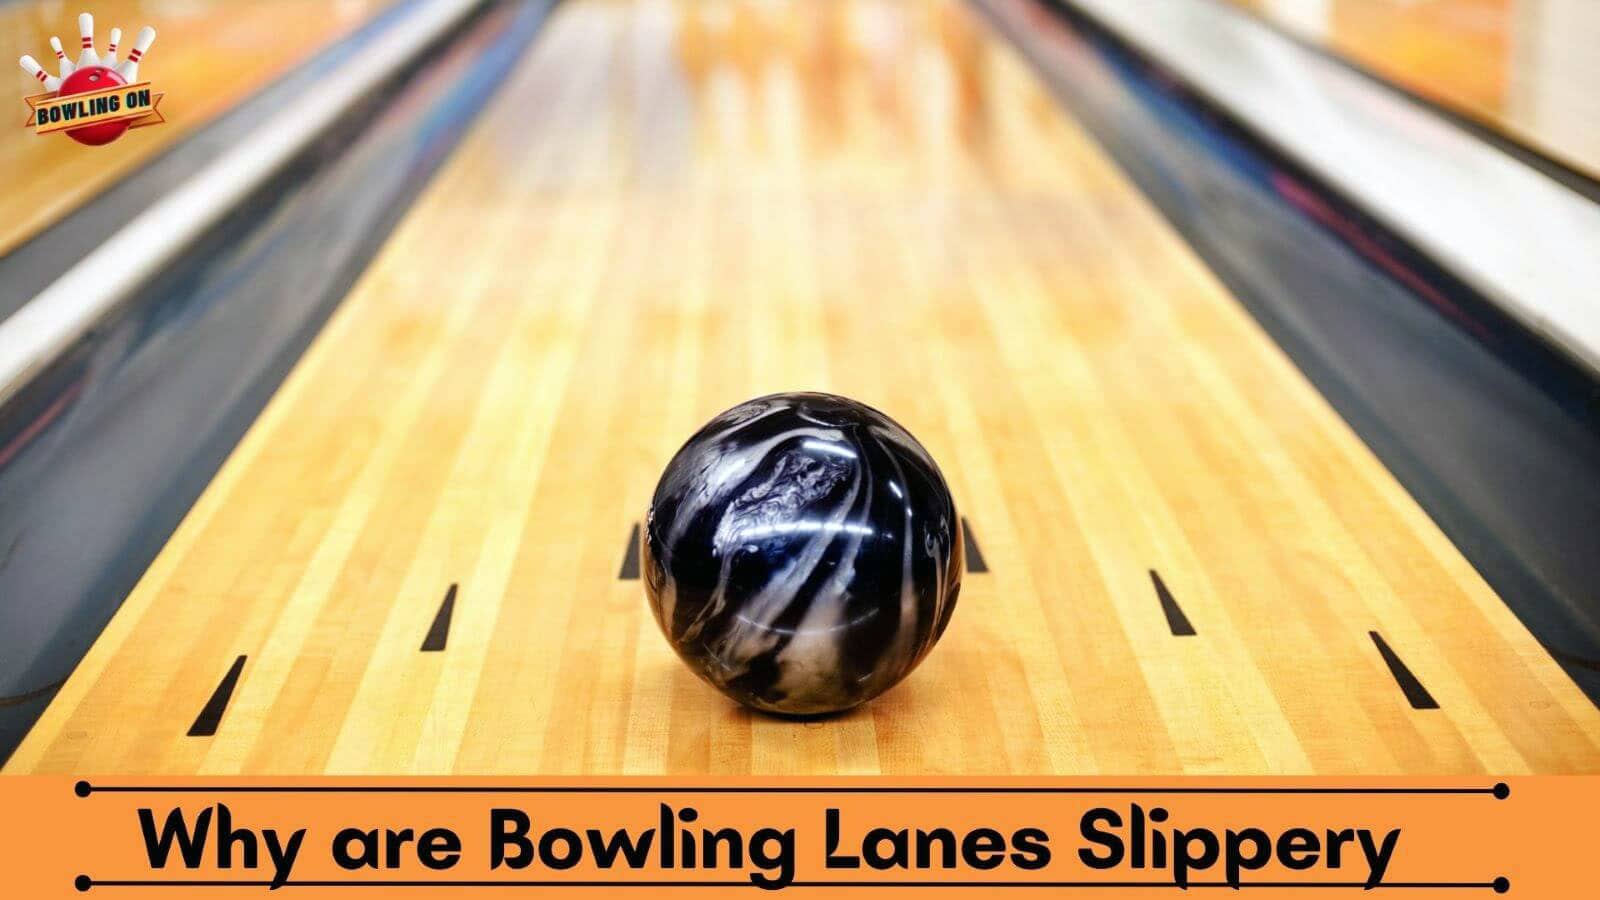 Why are Bowling Lanes Slippery